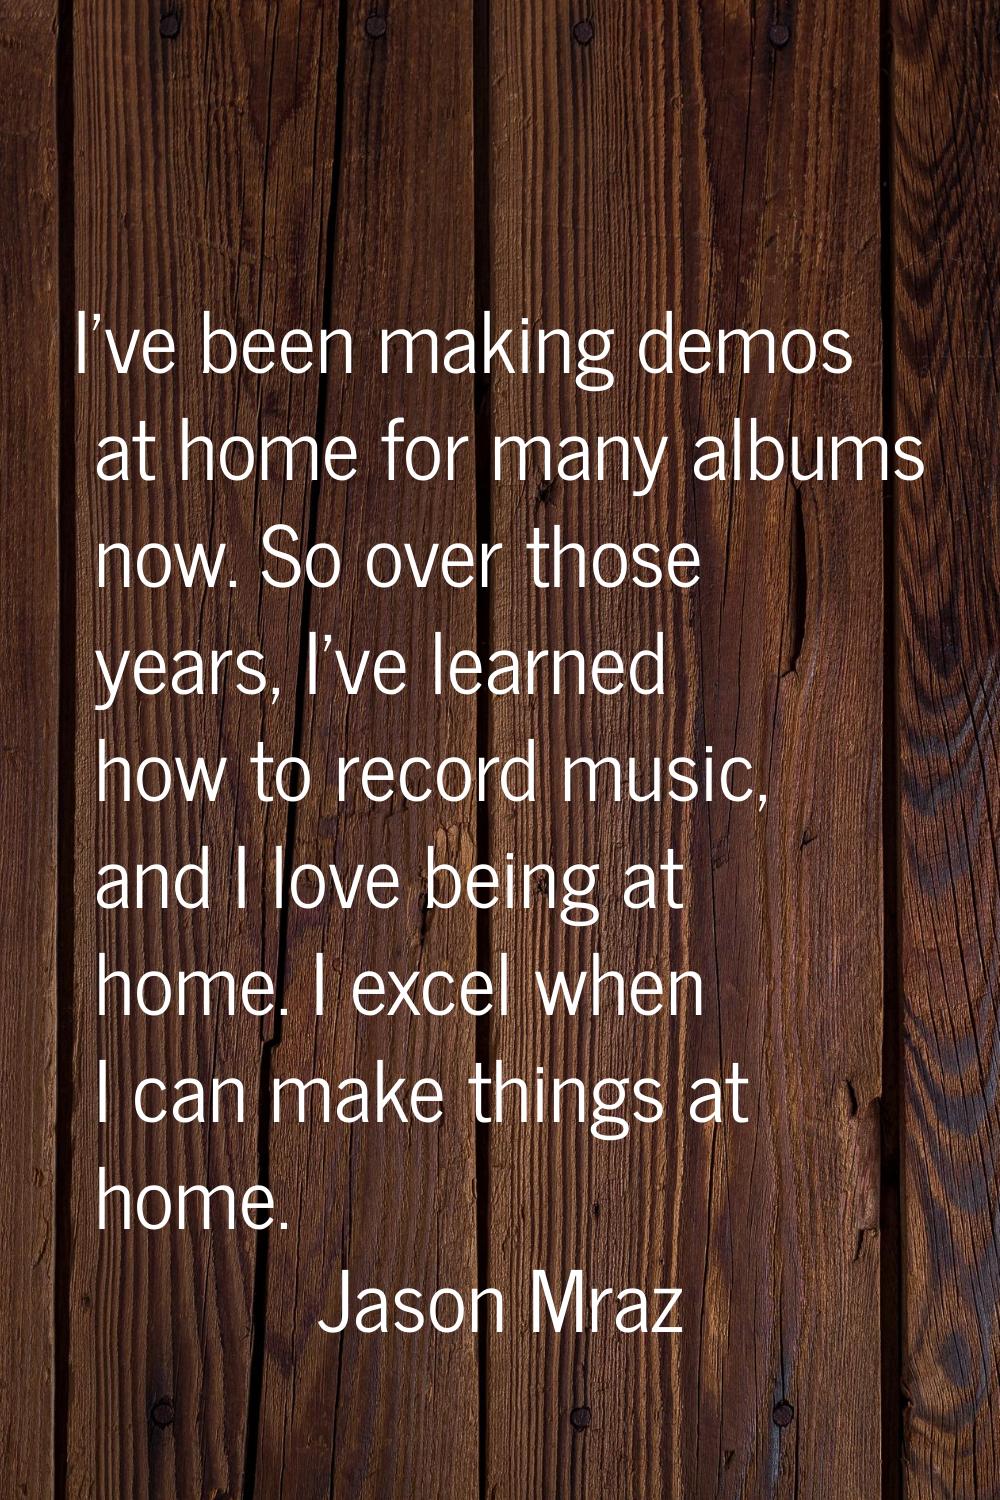 I've been making demos at home for many albums now. So over those years, I've learned how to record